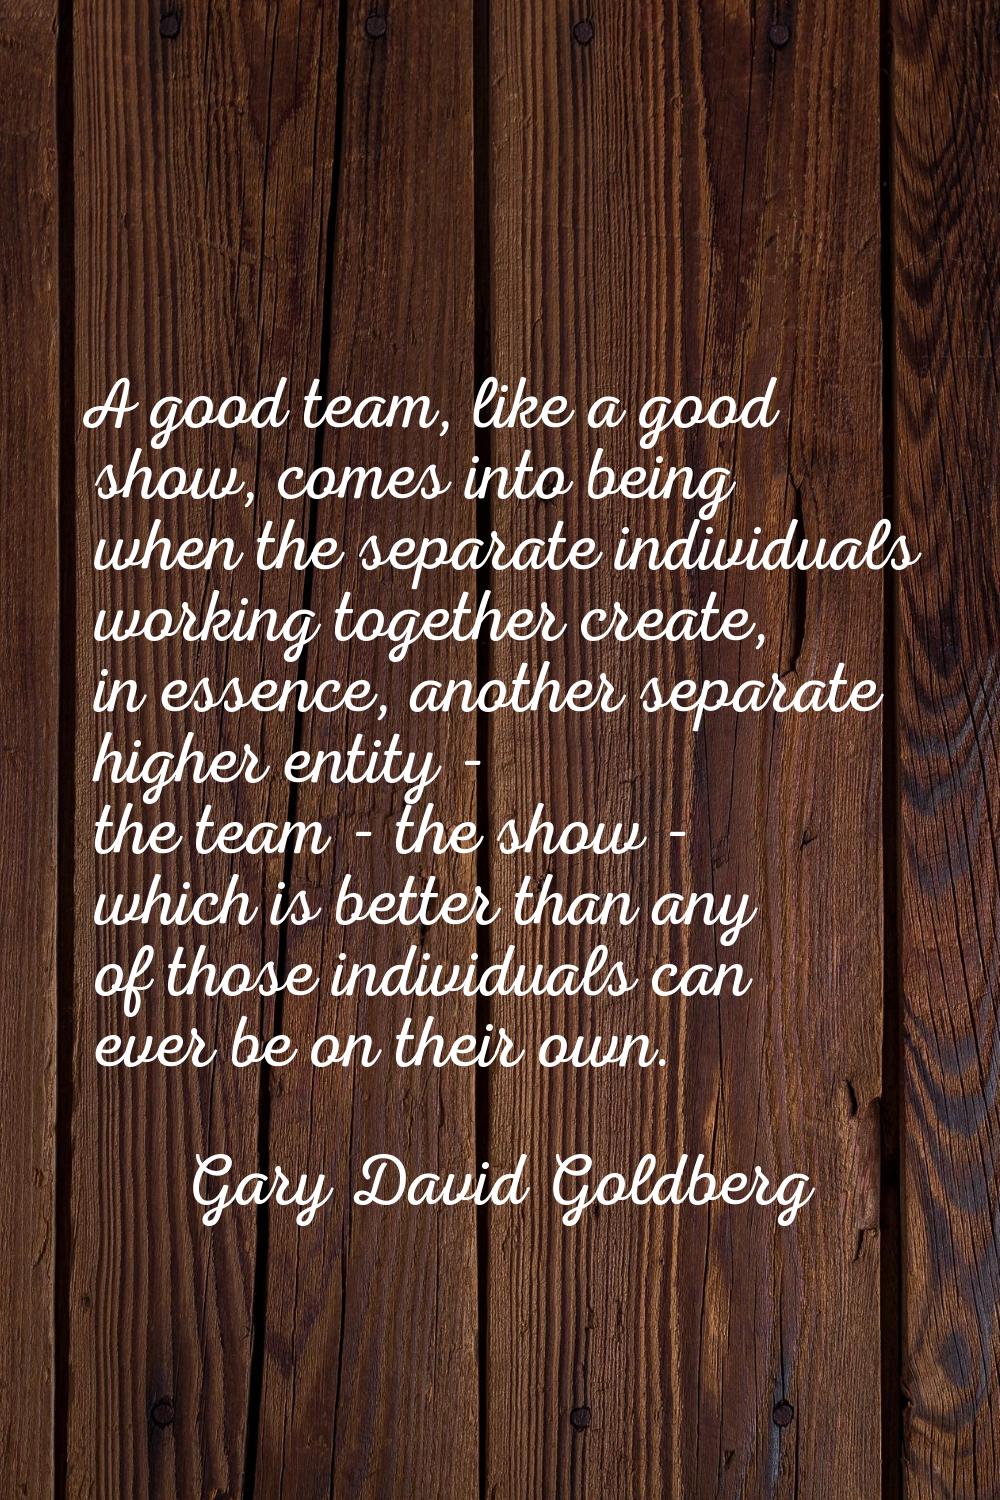 A good team, like a good show, comes into being when the separate individuals working together crea